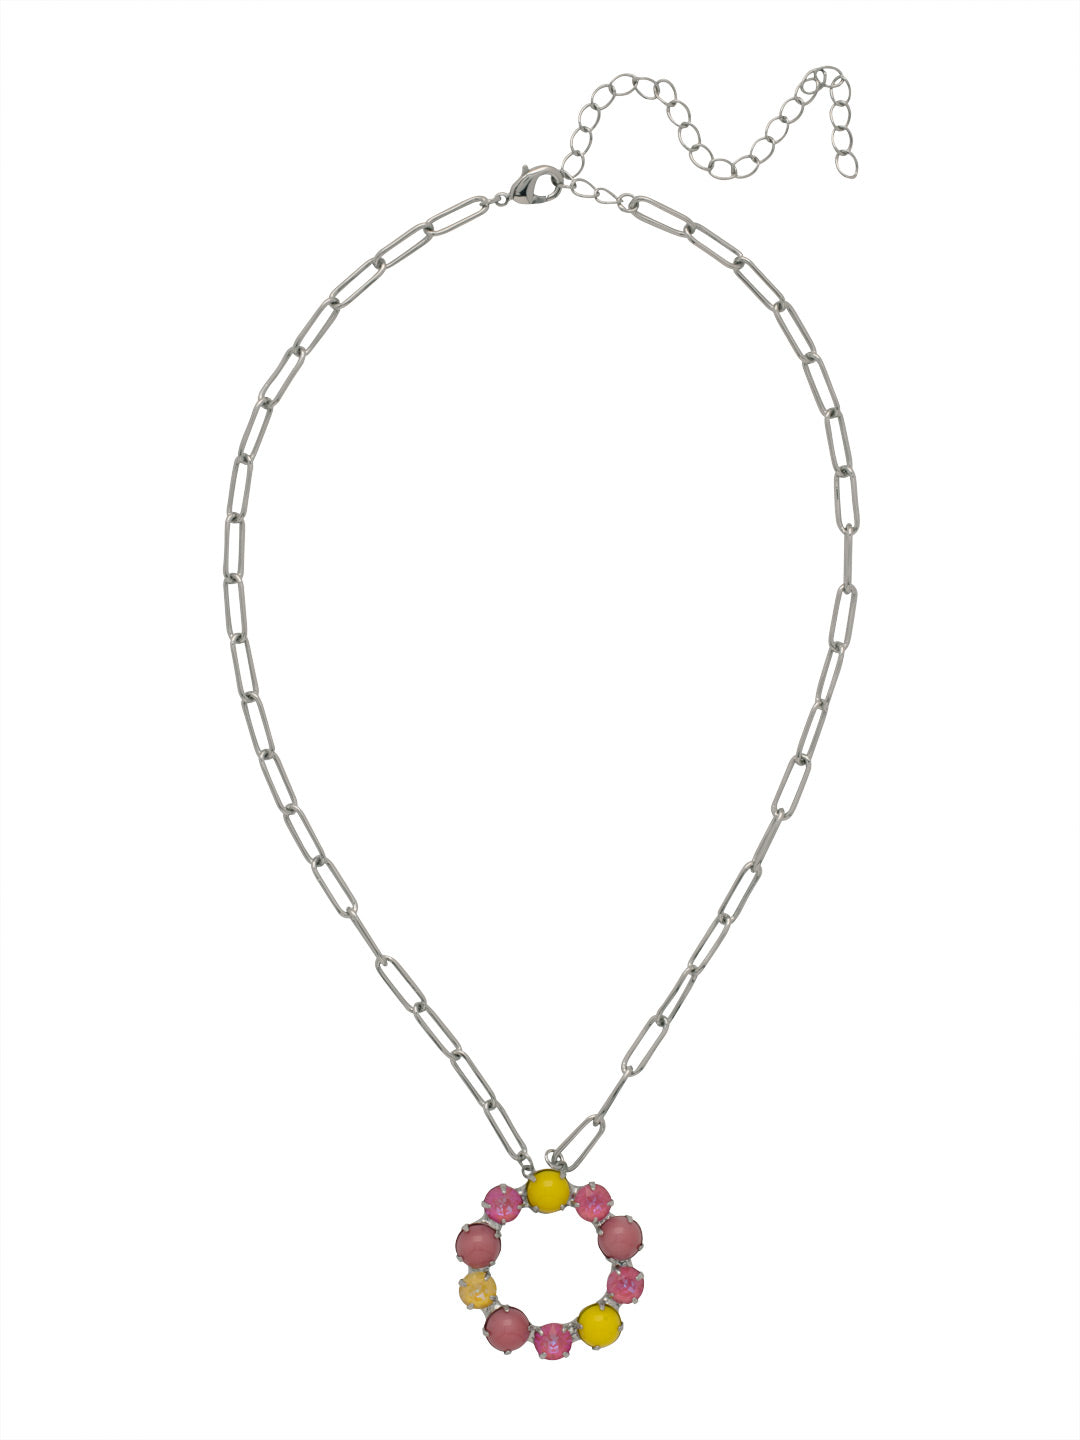 Xena Paperclip Pendant Necklace - NFF11PDPPN - <p>The Xena Paperclip Pendant Necklace features a wreath of semi-precious stones at the base of a trendy, adjustable paperclip chain, secured by a lobster claw clasp. From Sorrelli's Pink Pineapple collection in our Palladium finish.</p>